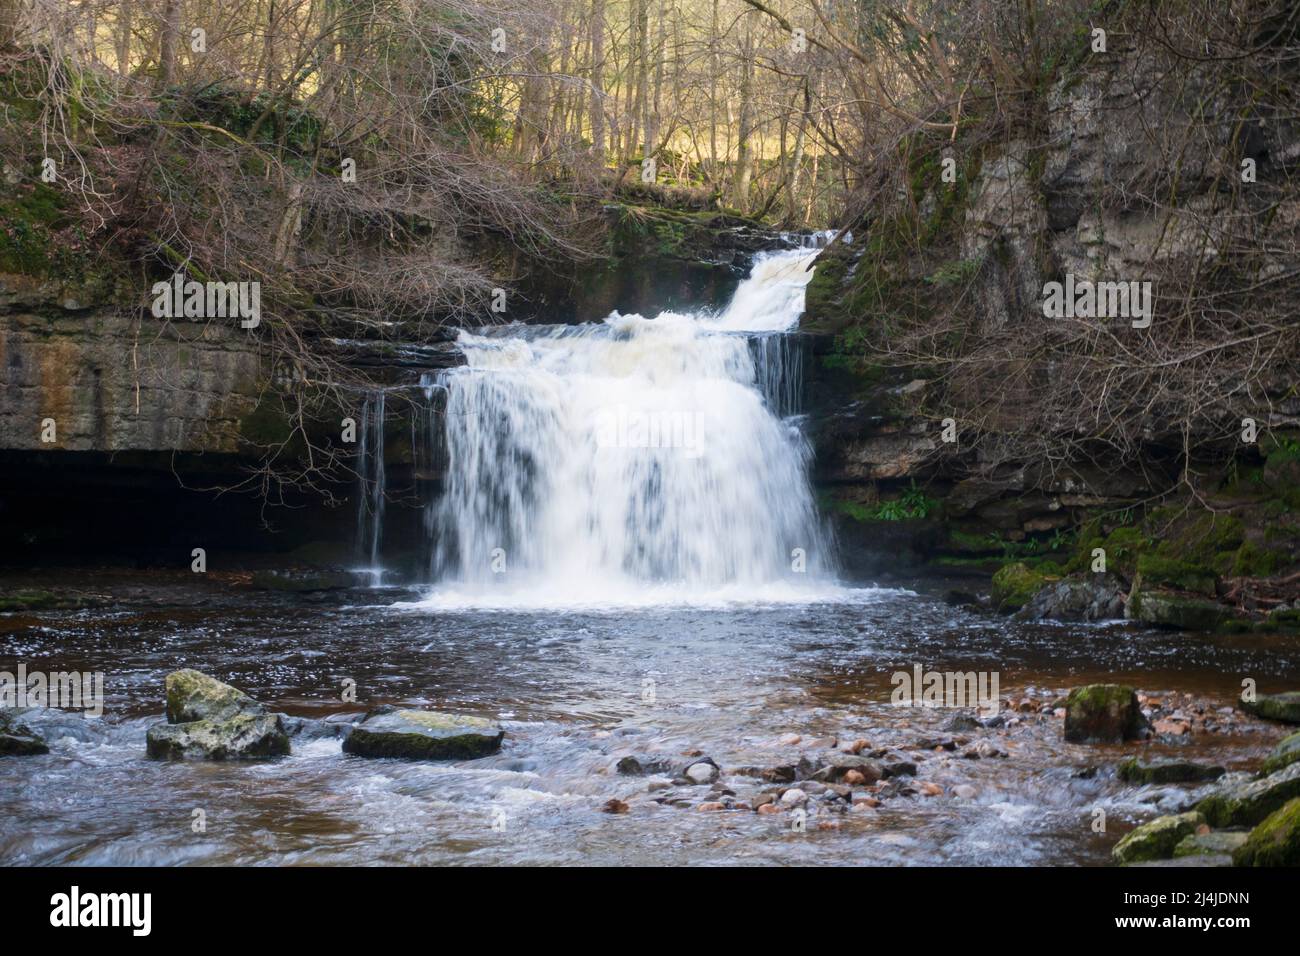 West Burton Falls, Wensleydale, Yorkshire Dales National Park.  Also known as Cauldron Falls, the beautiful waterfall is tucked away in a small villag Stock Photo